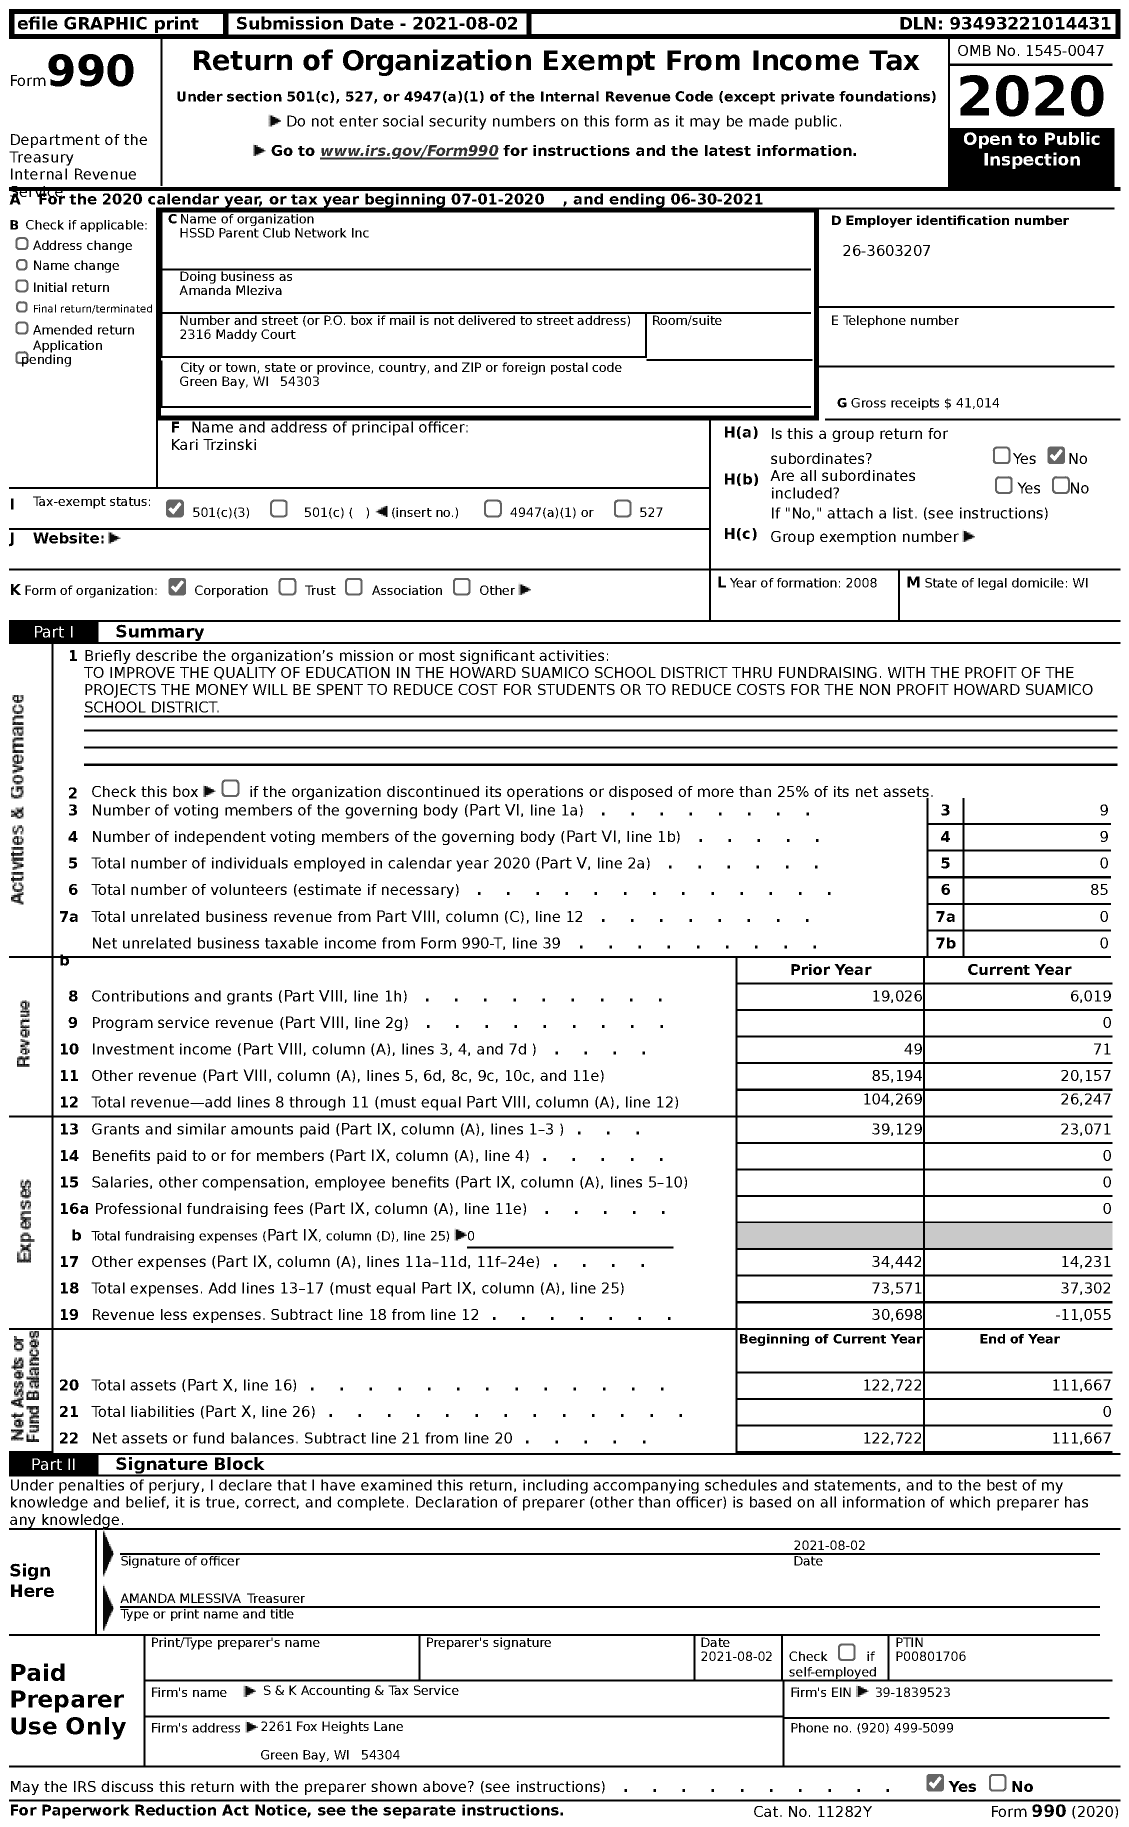 Image of first page of 2020 Form 990 for Amanda Mleziva